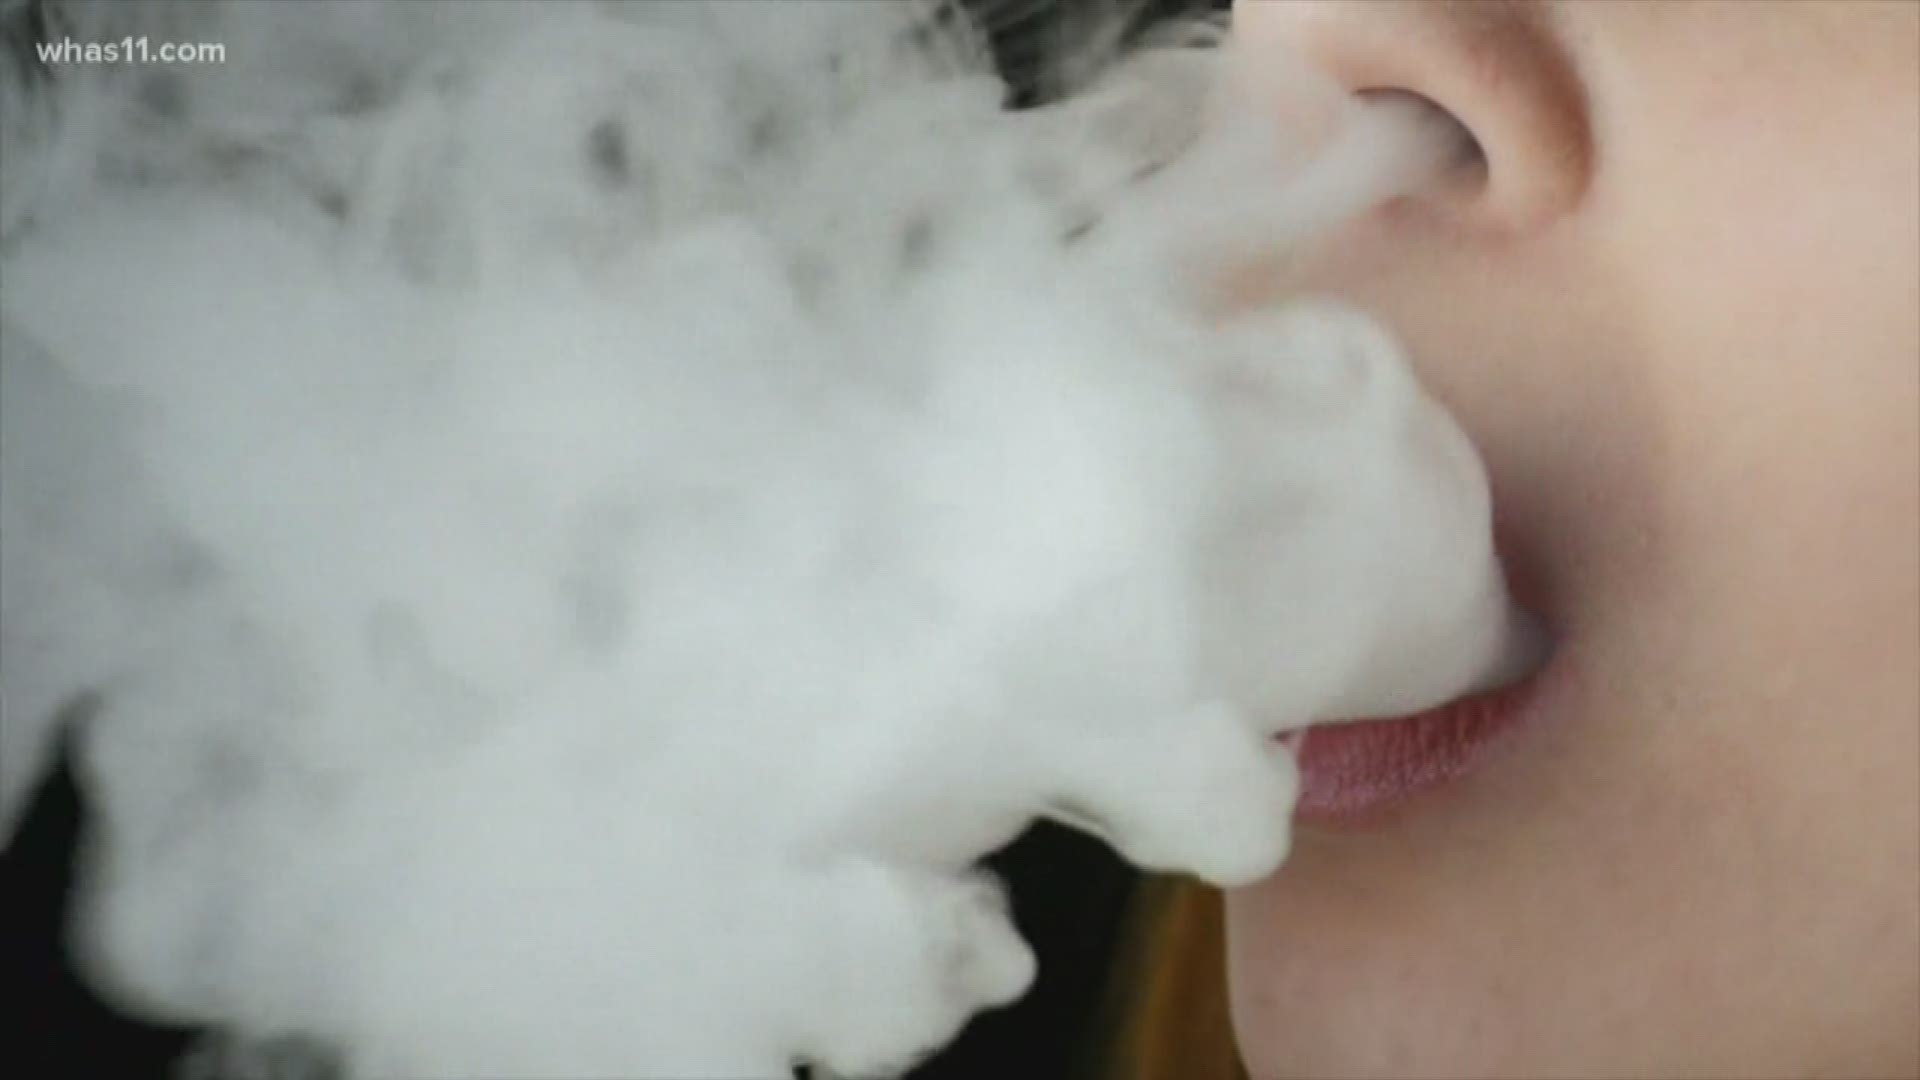 Fatality from lung injury reported as probable case in the state's first vaping-related death.